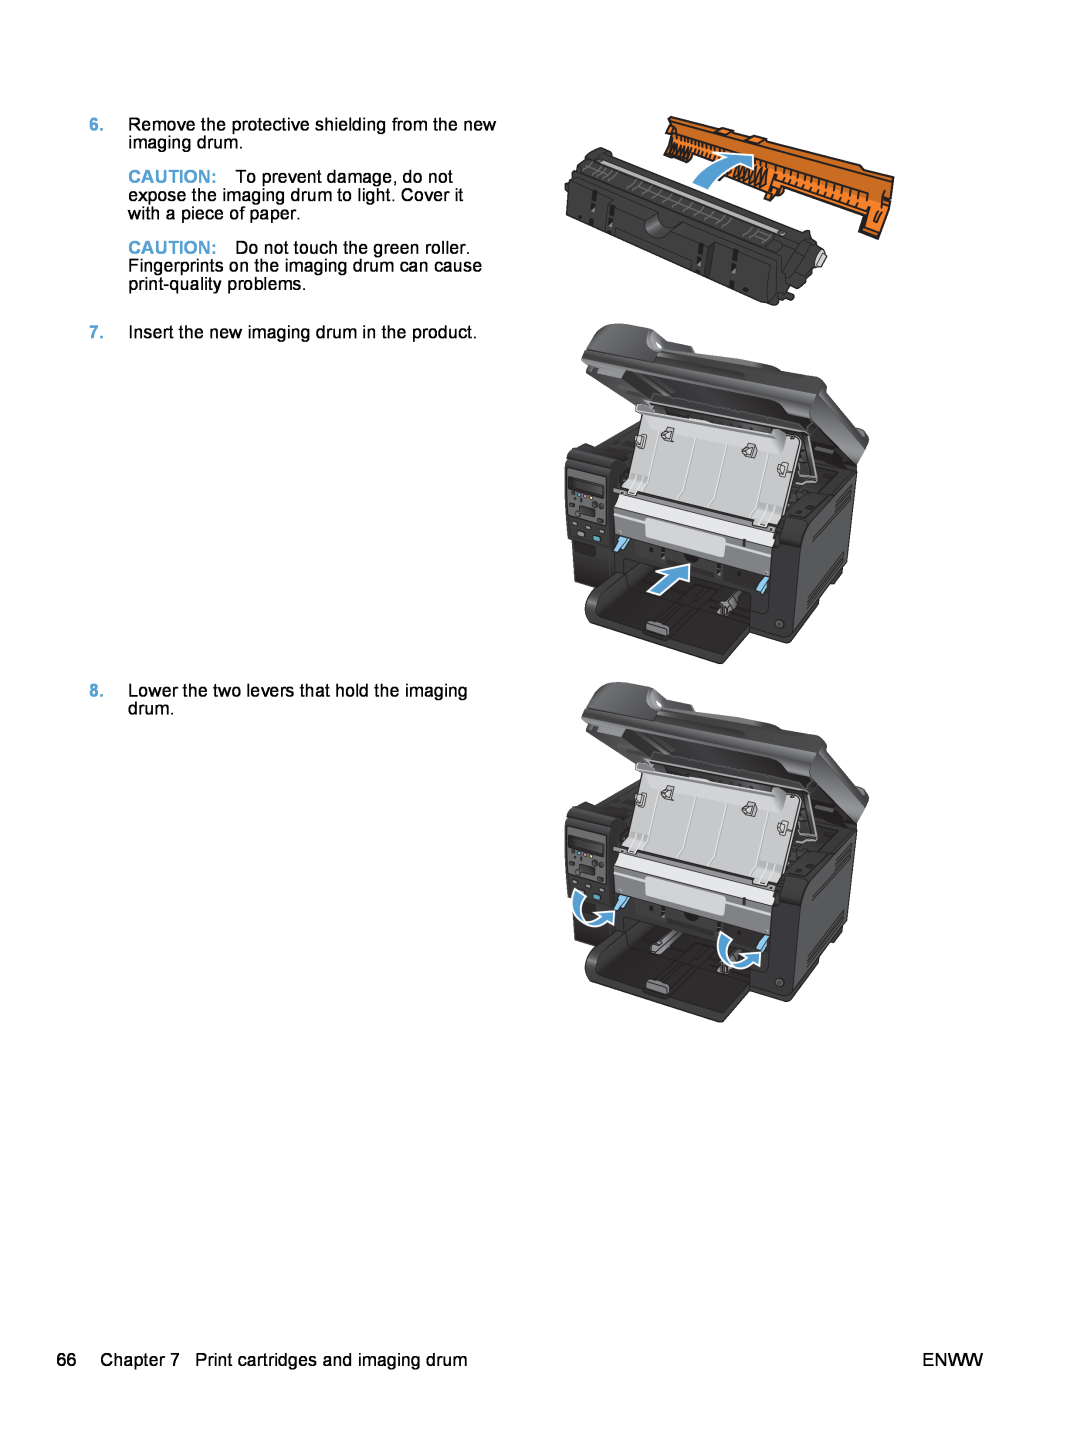 HP 100 CE866ARBGJ Remove the protective shielding from the new imaging drum, Insert the new imaging drum in the product 